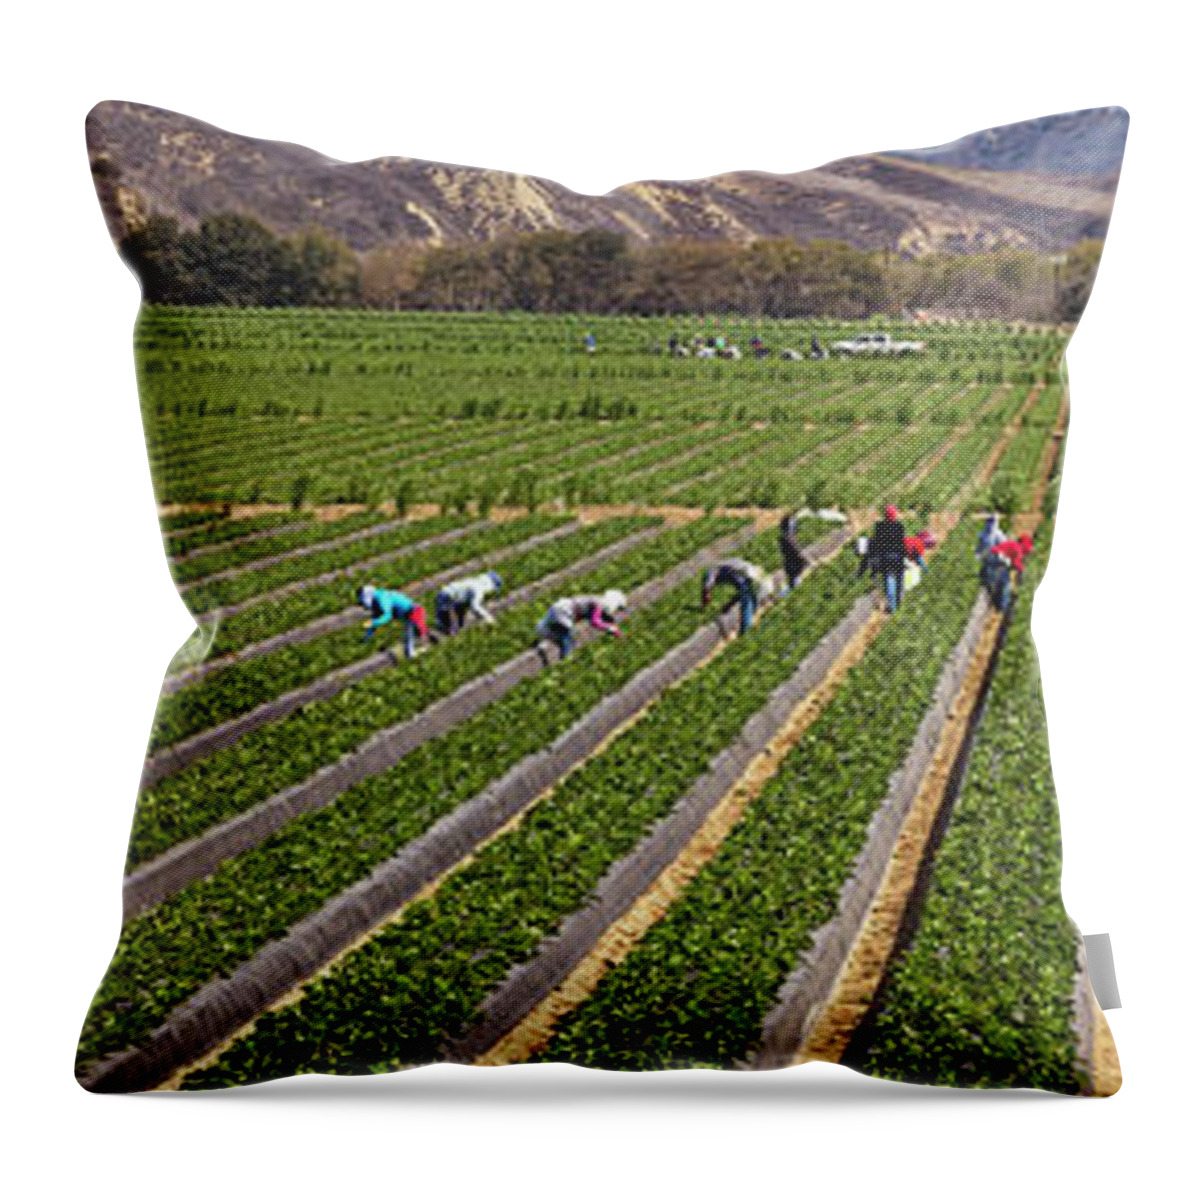 Photography Throw Pillow featuring the photograph People Picking Strawberries In A Field by Panoramic Images